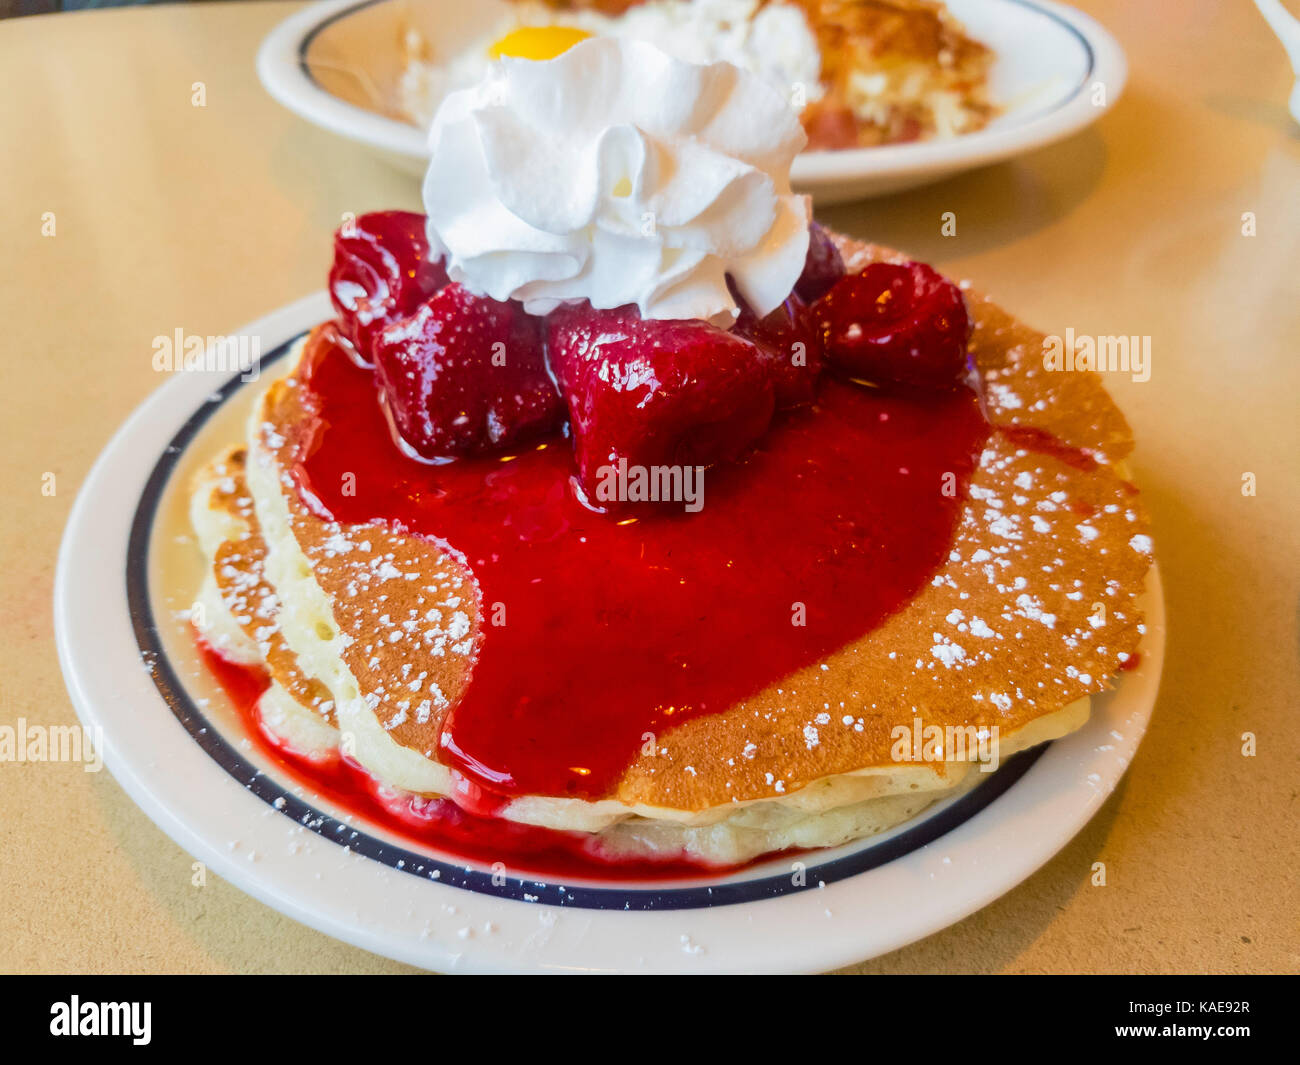 Close up shoot of traidional american breakfast of cream, Strawberry and pancake, photo taken at a chain restaurant, Los Angeles, California, United S Stock Photo